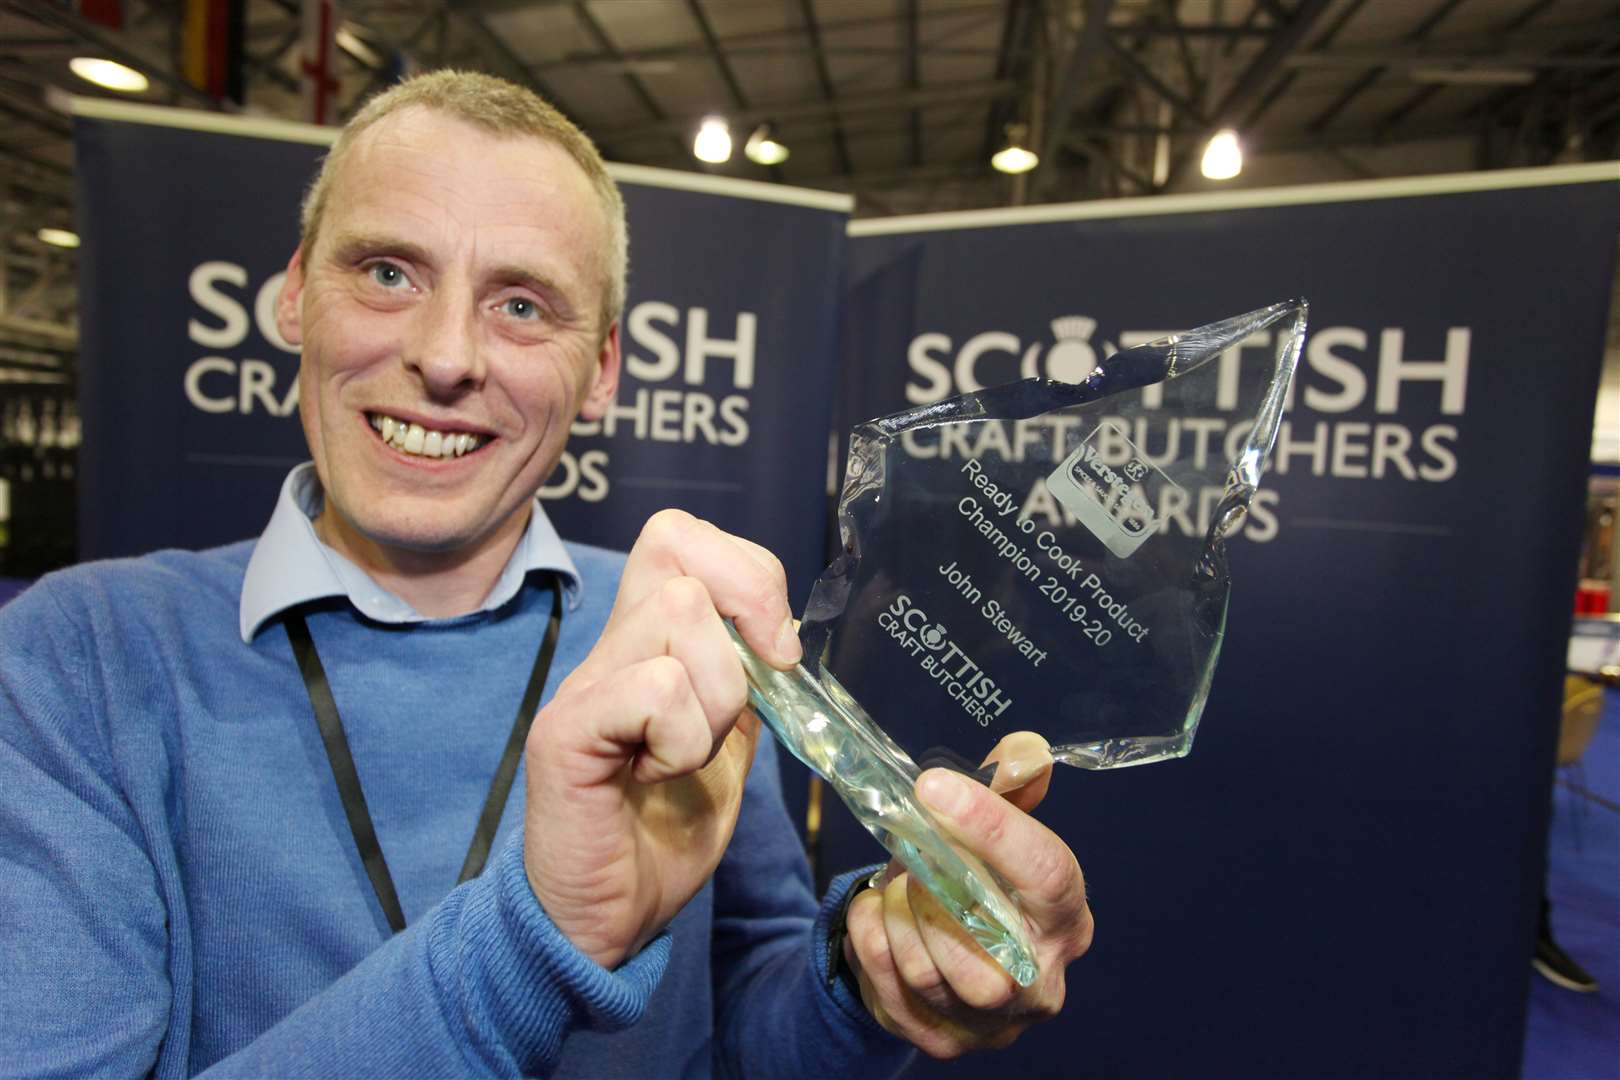 John Stewart Butchers owner Andy Grant with the diamond award for Scotland's best ready-to-cook product.